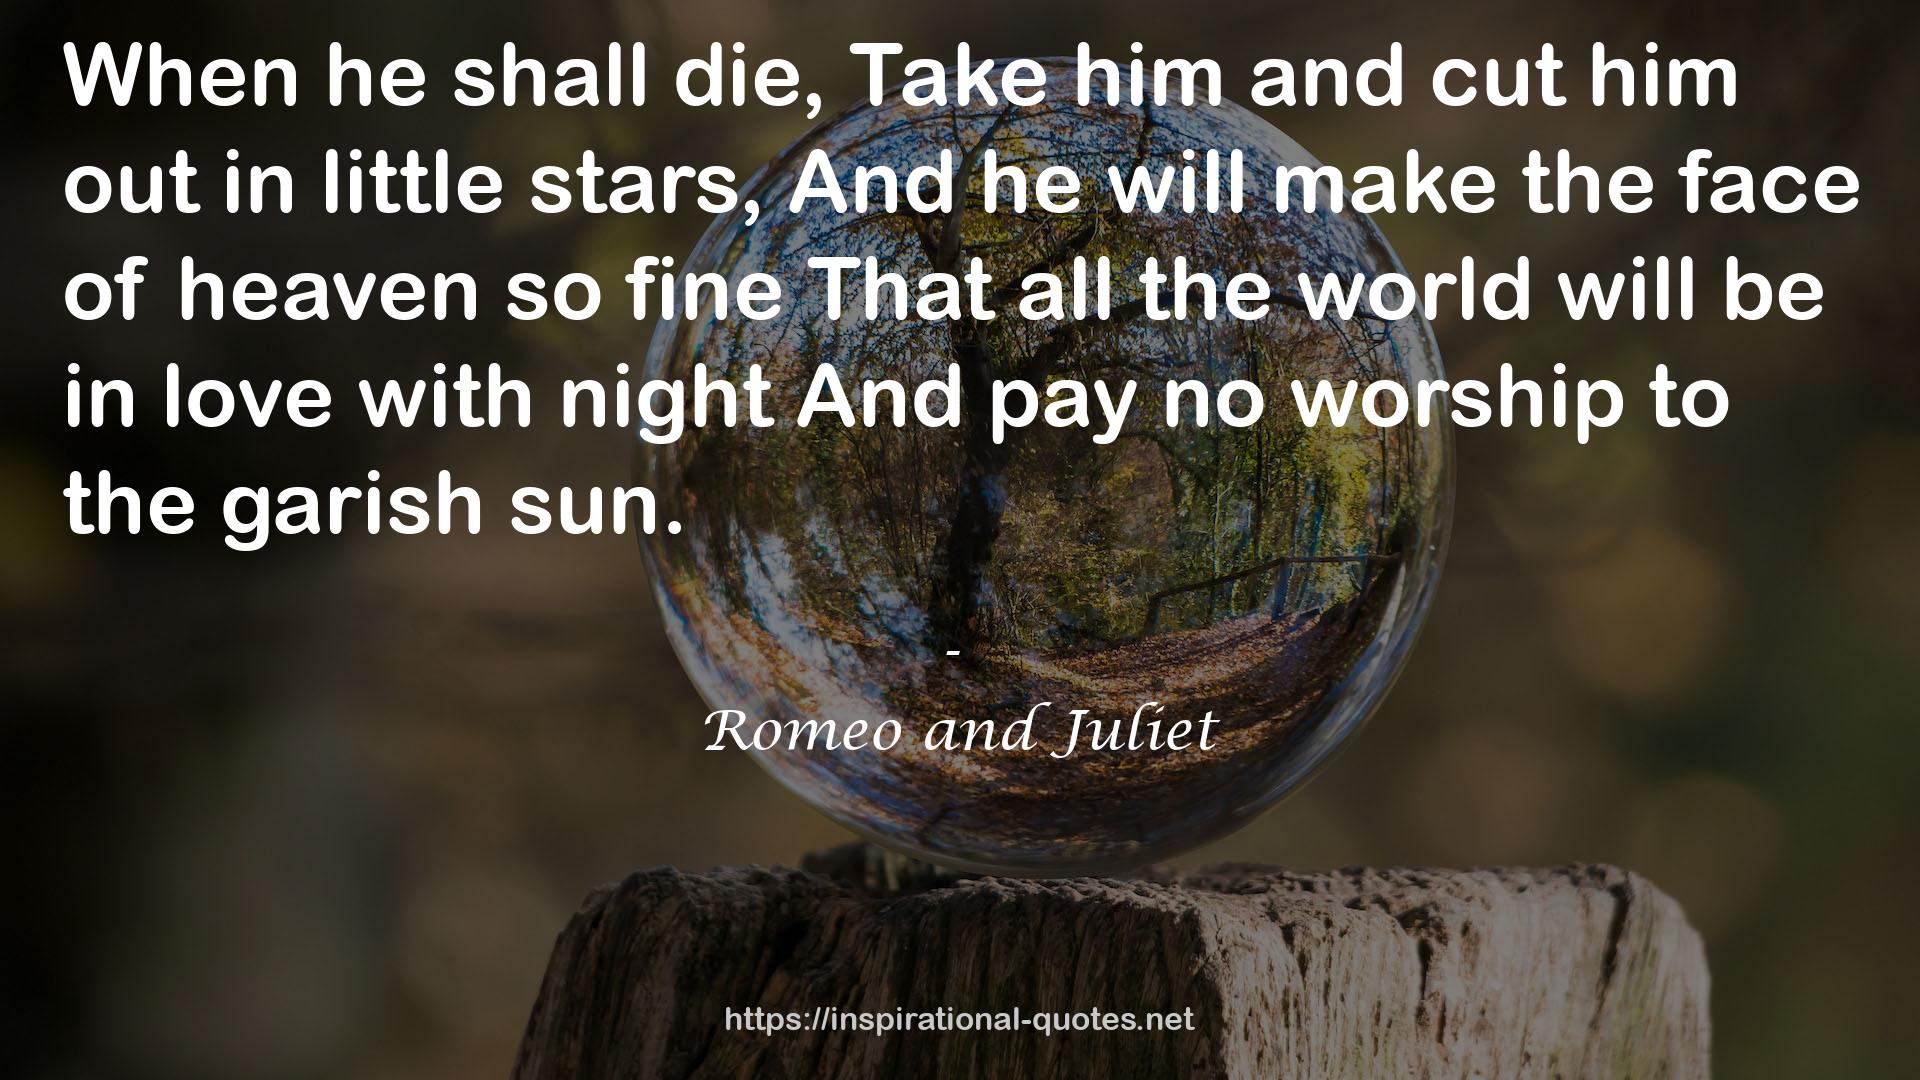 Romeo and Juliet QUOTES